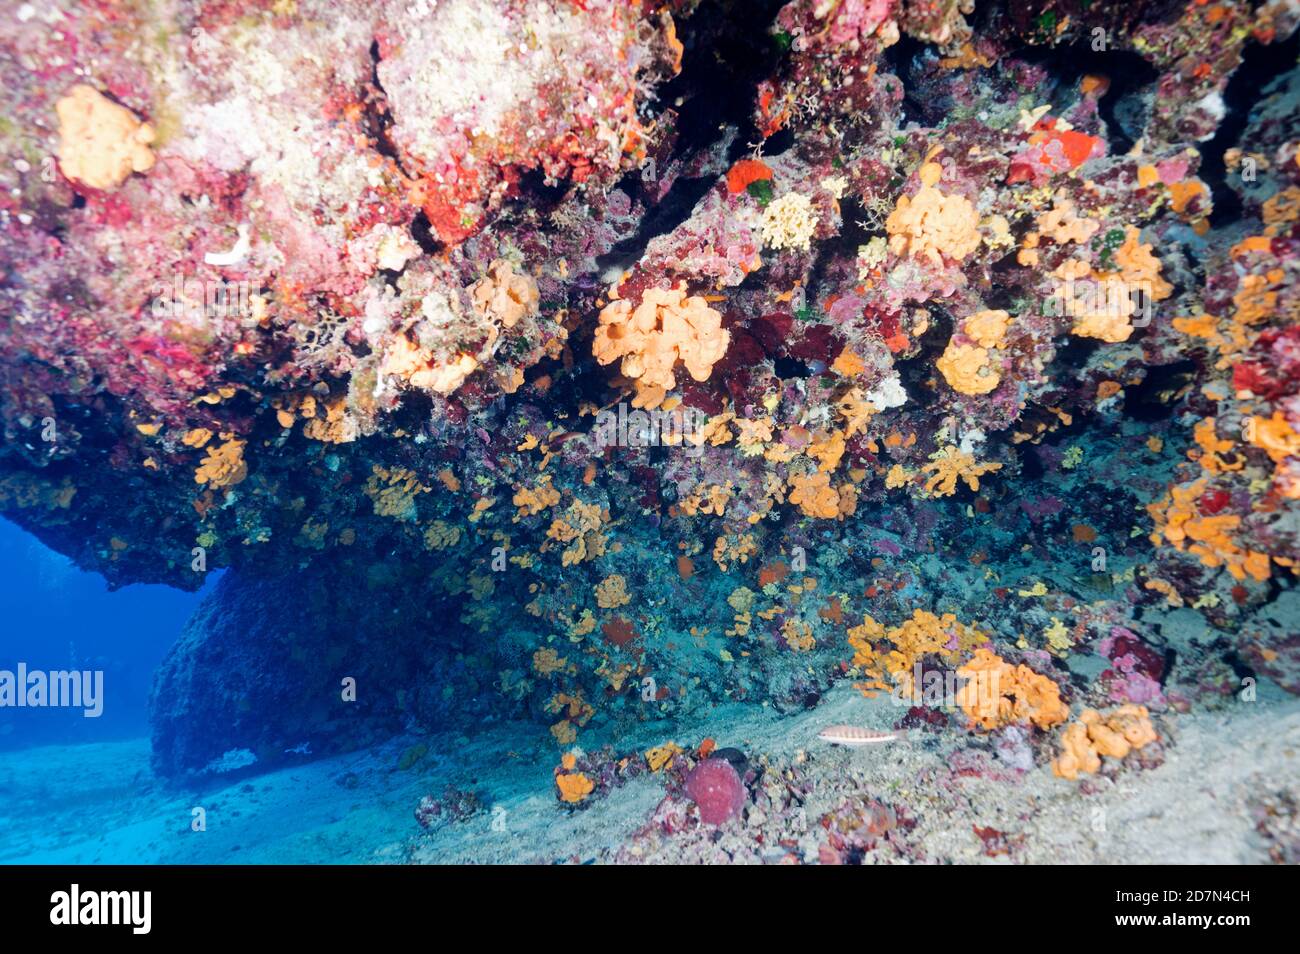 Overhang covered with sponges and coralline algaes Gokova Bay Turkey Stock Photo